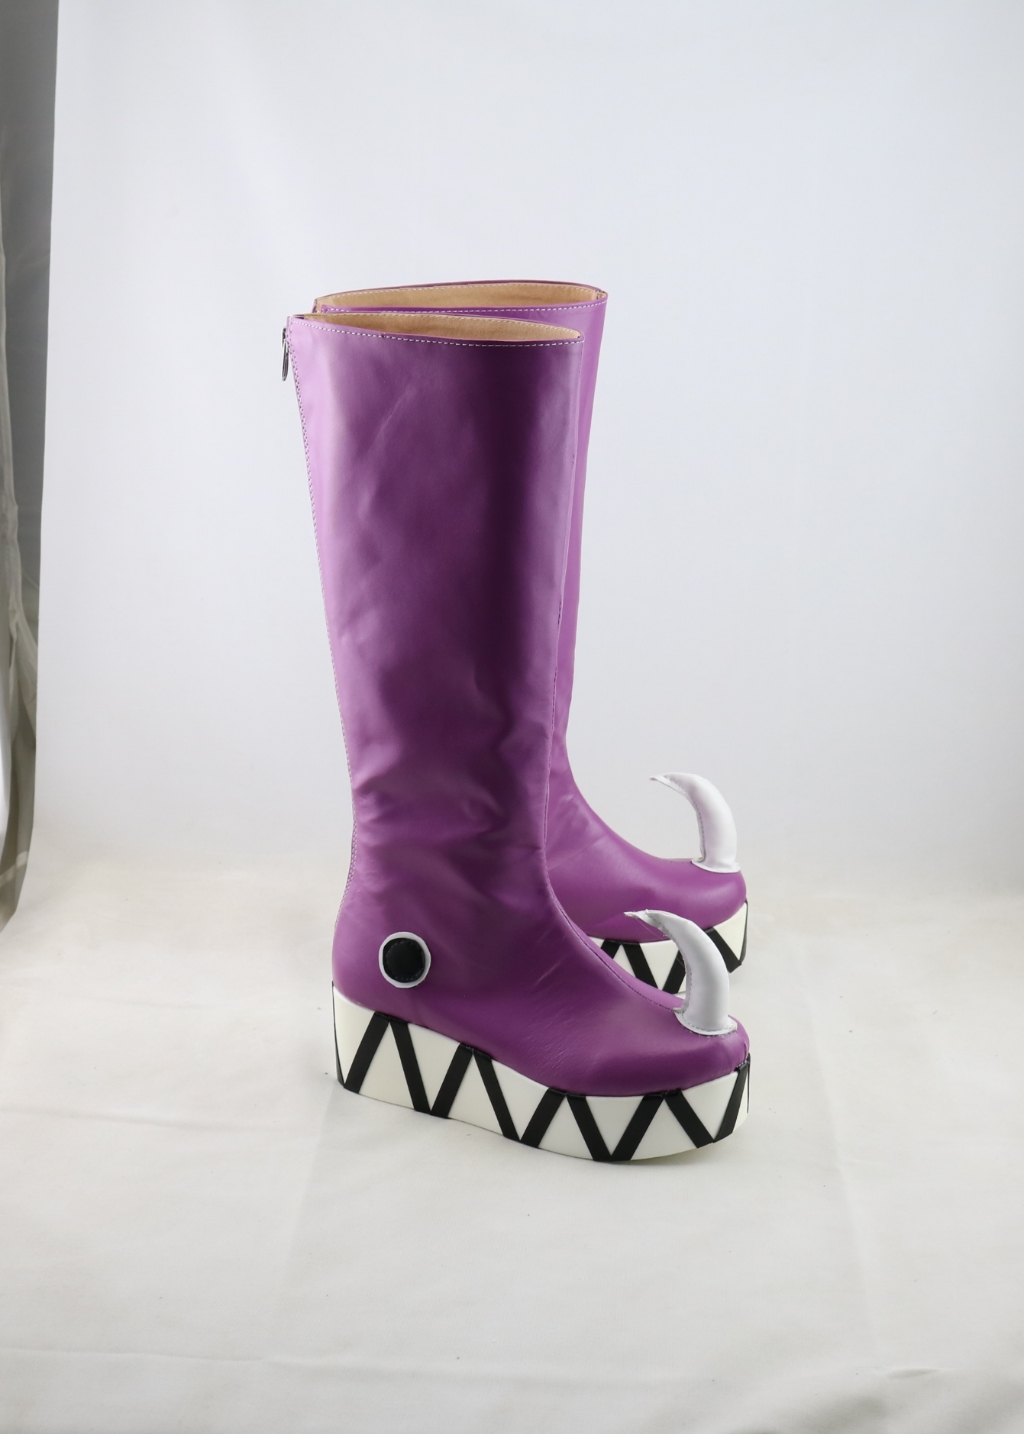 Butterfly Shoes Women Princess Star Boots Purple Ver Cosplay